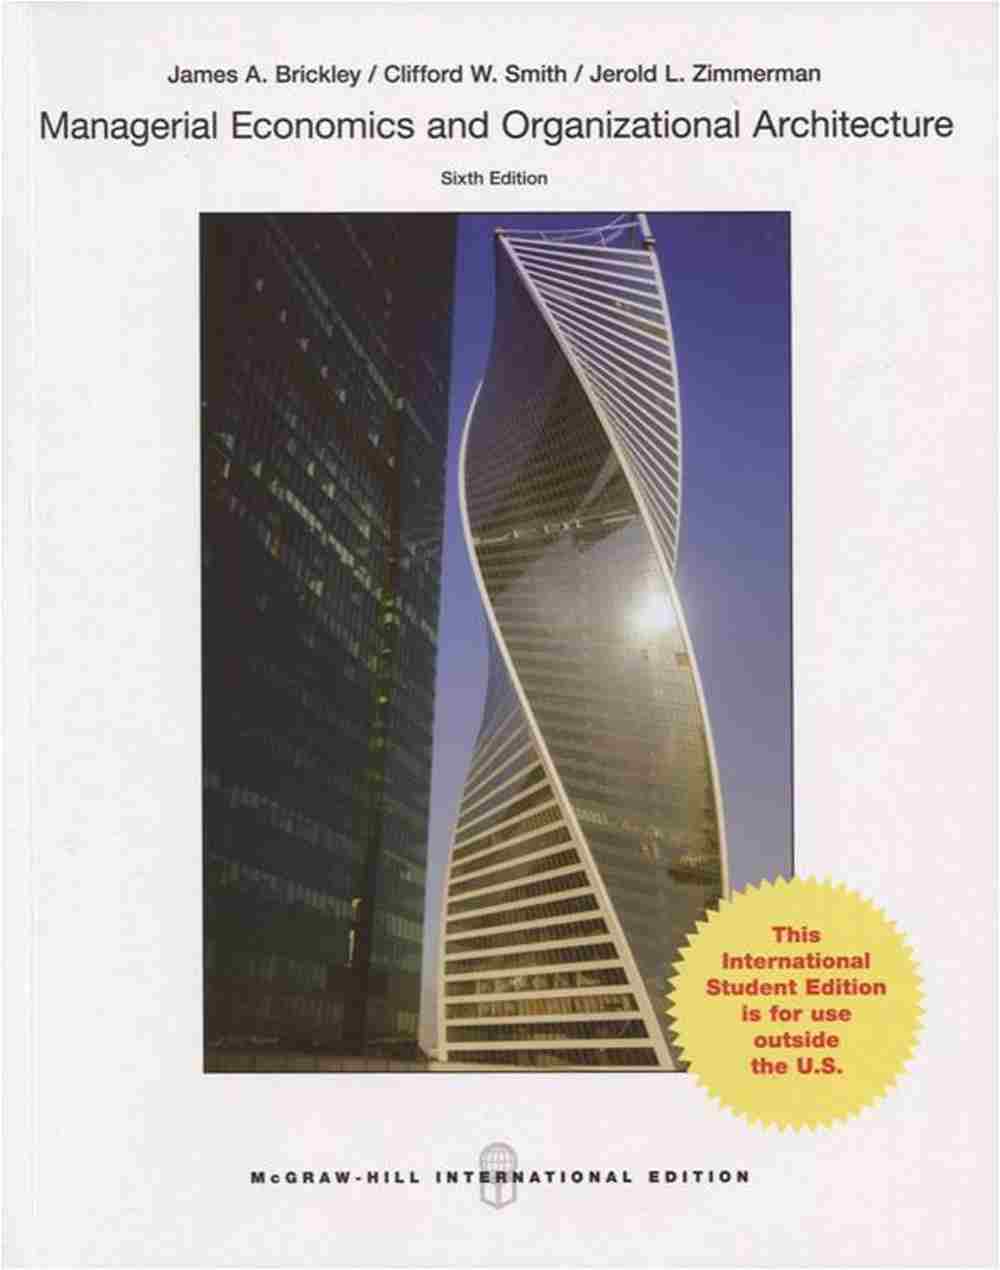 Managerial Economics and Organizational Architecture(六版)